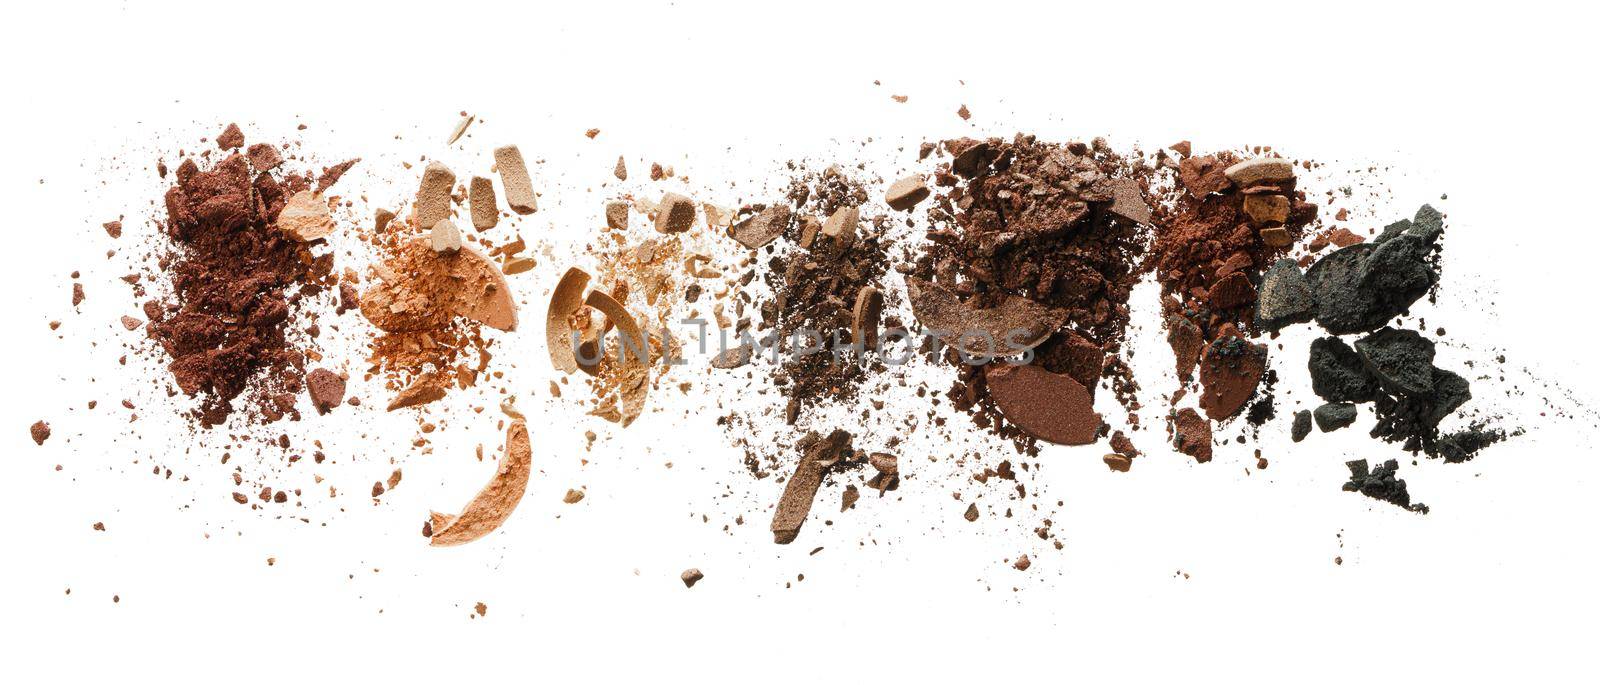 Smudged eyeshadows isolated on white background, top view, close up.